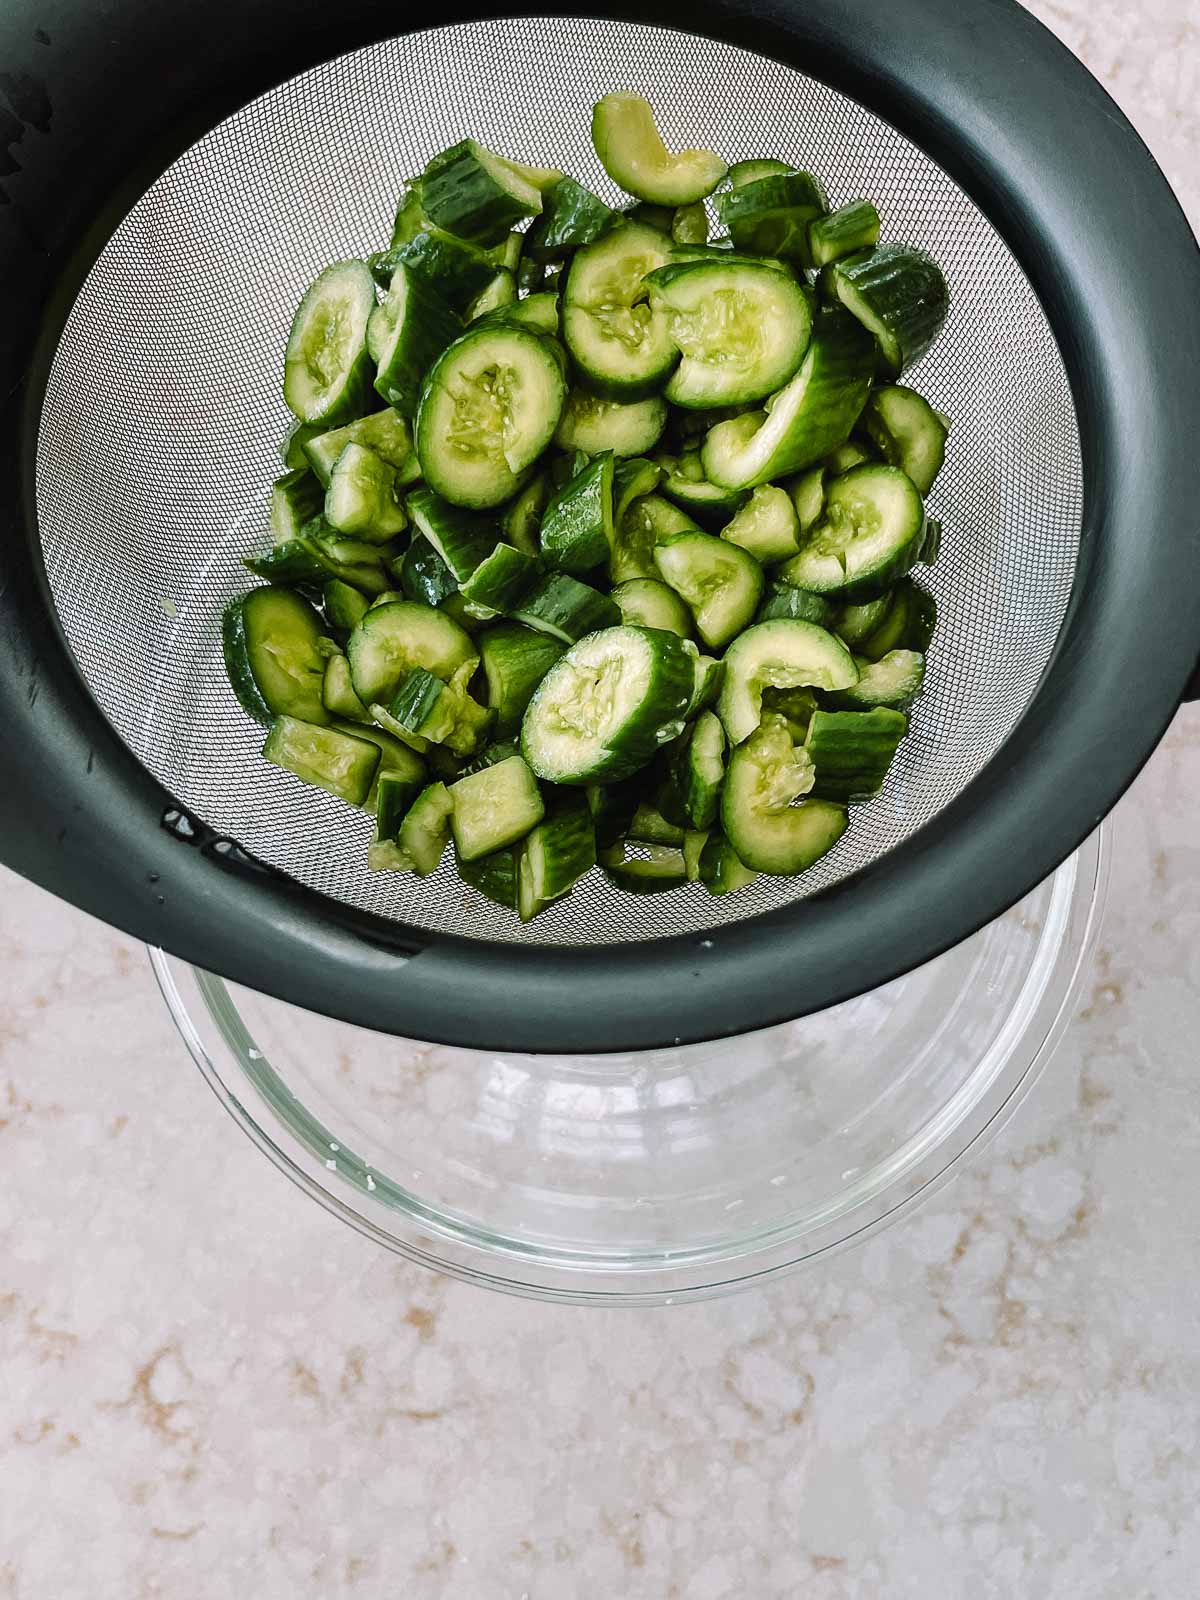 Sliced cucumbers in a strainer over a glass bowl.